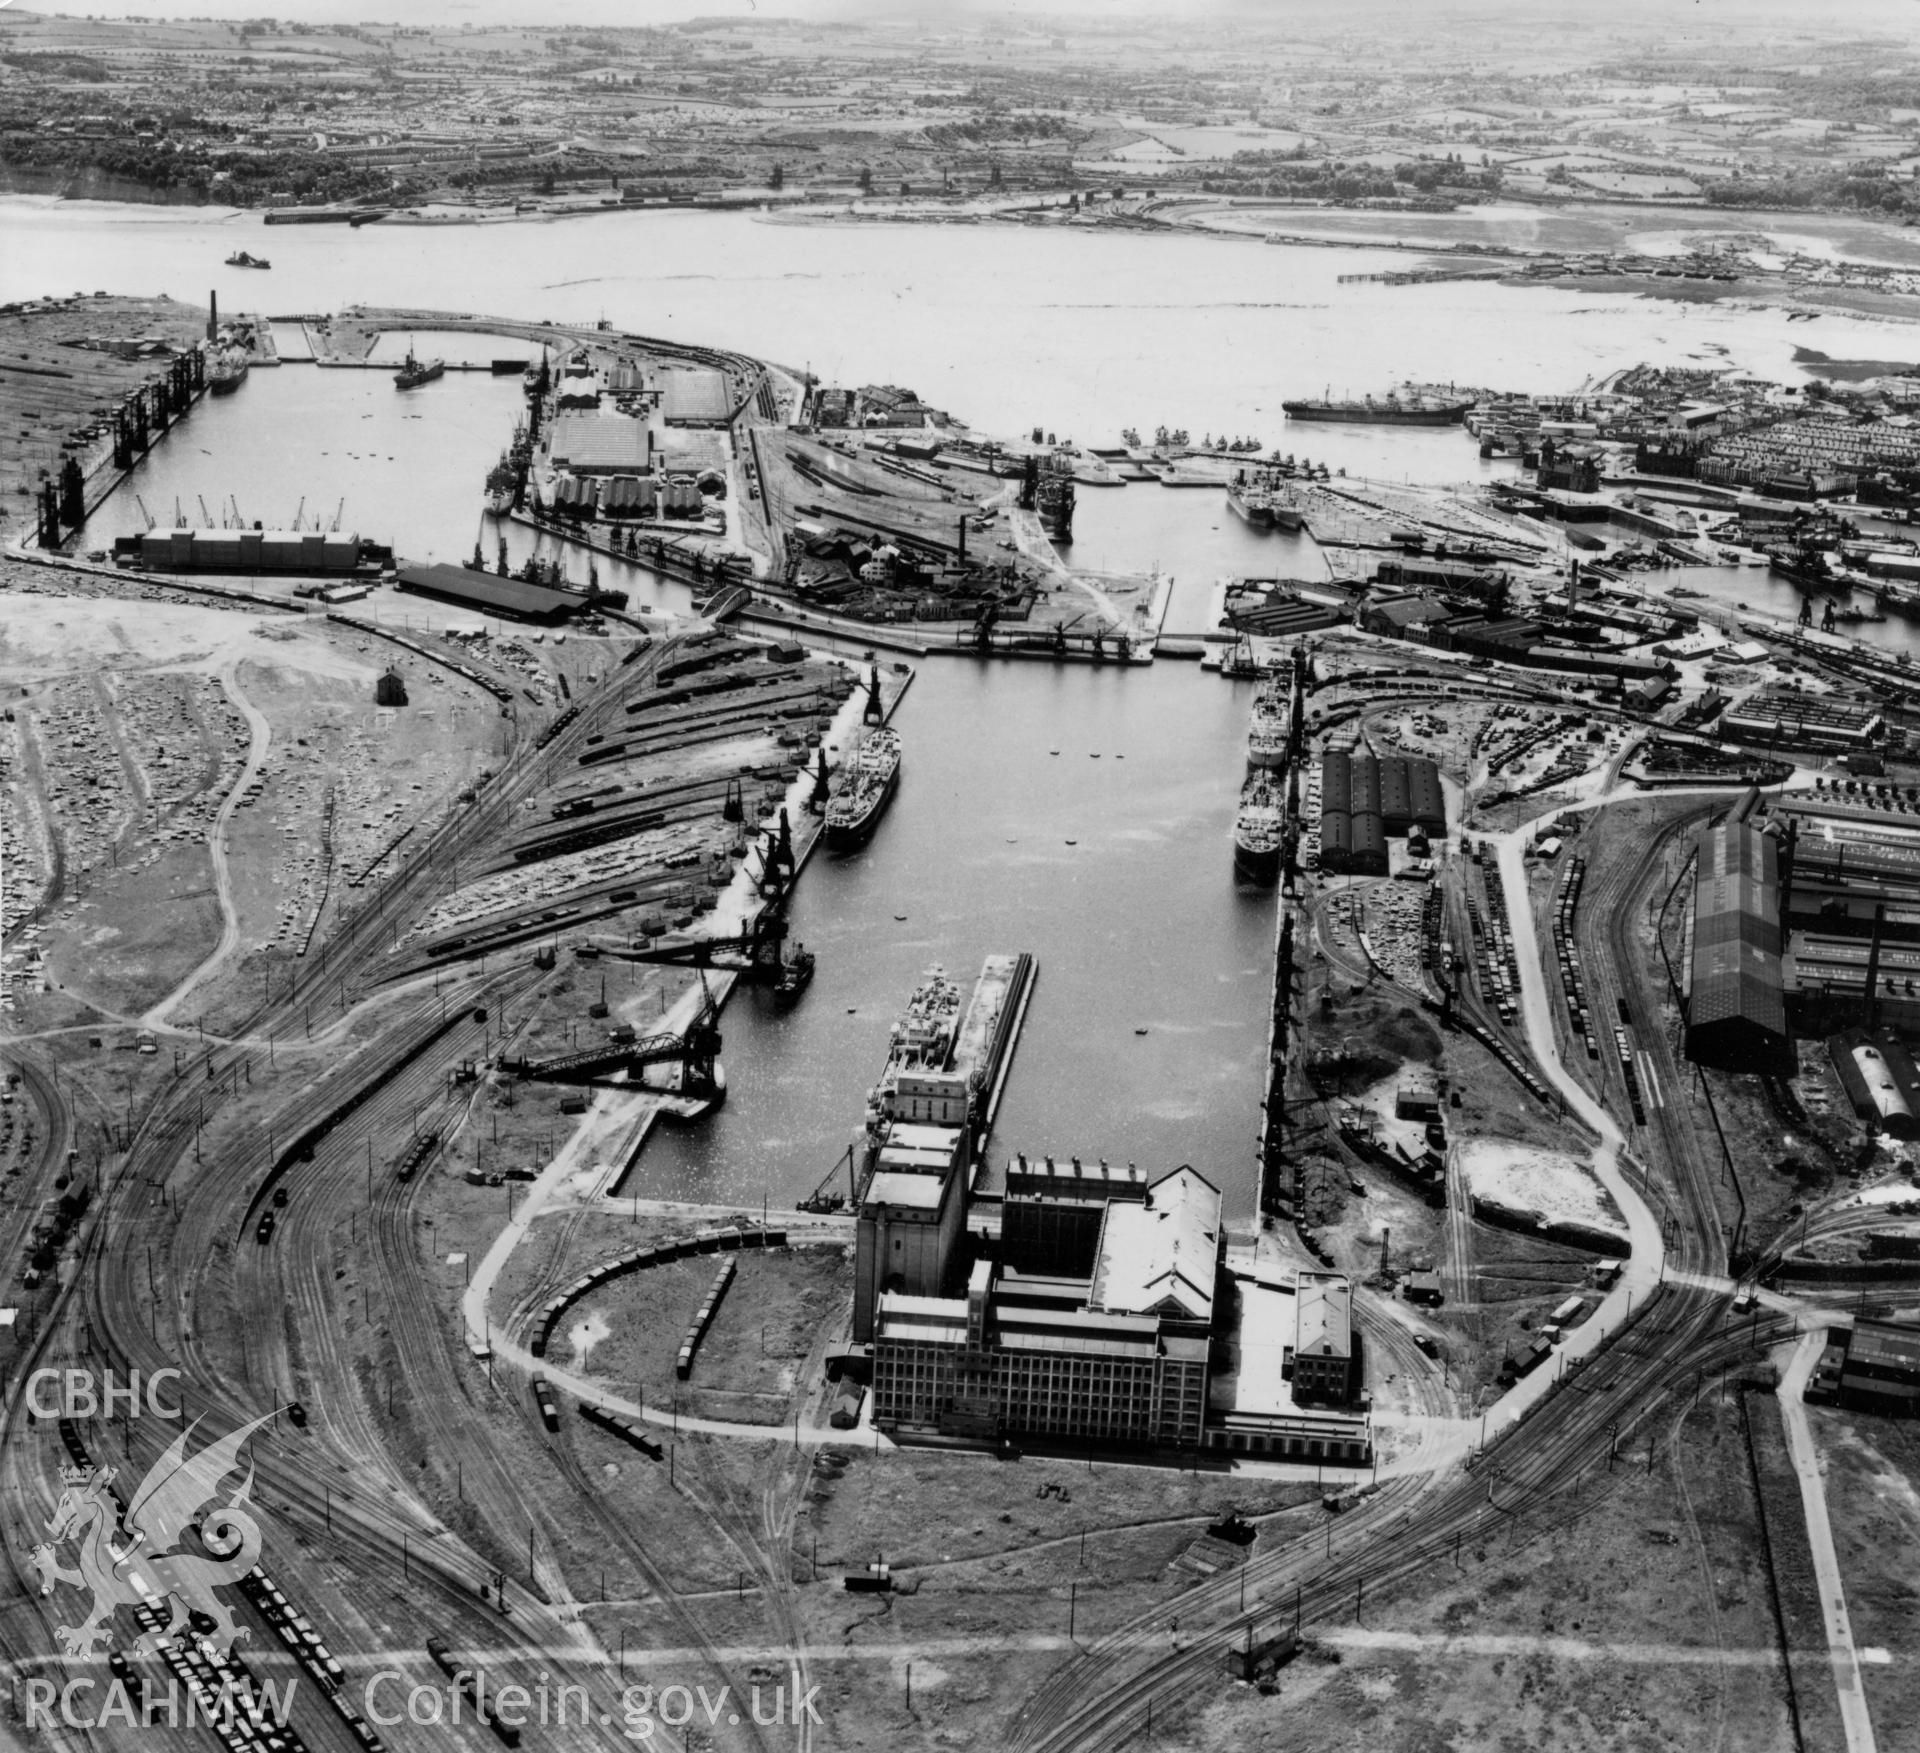 View of Cardiff docks from the east with Roath dock in the foreground. Oblique aerial photograph, 5?" cut roll film.